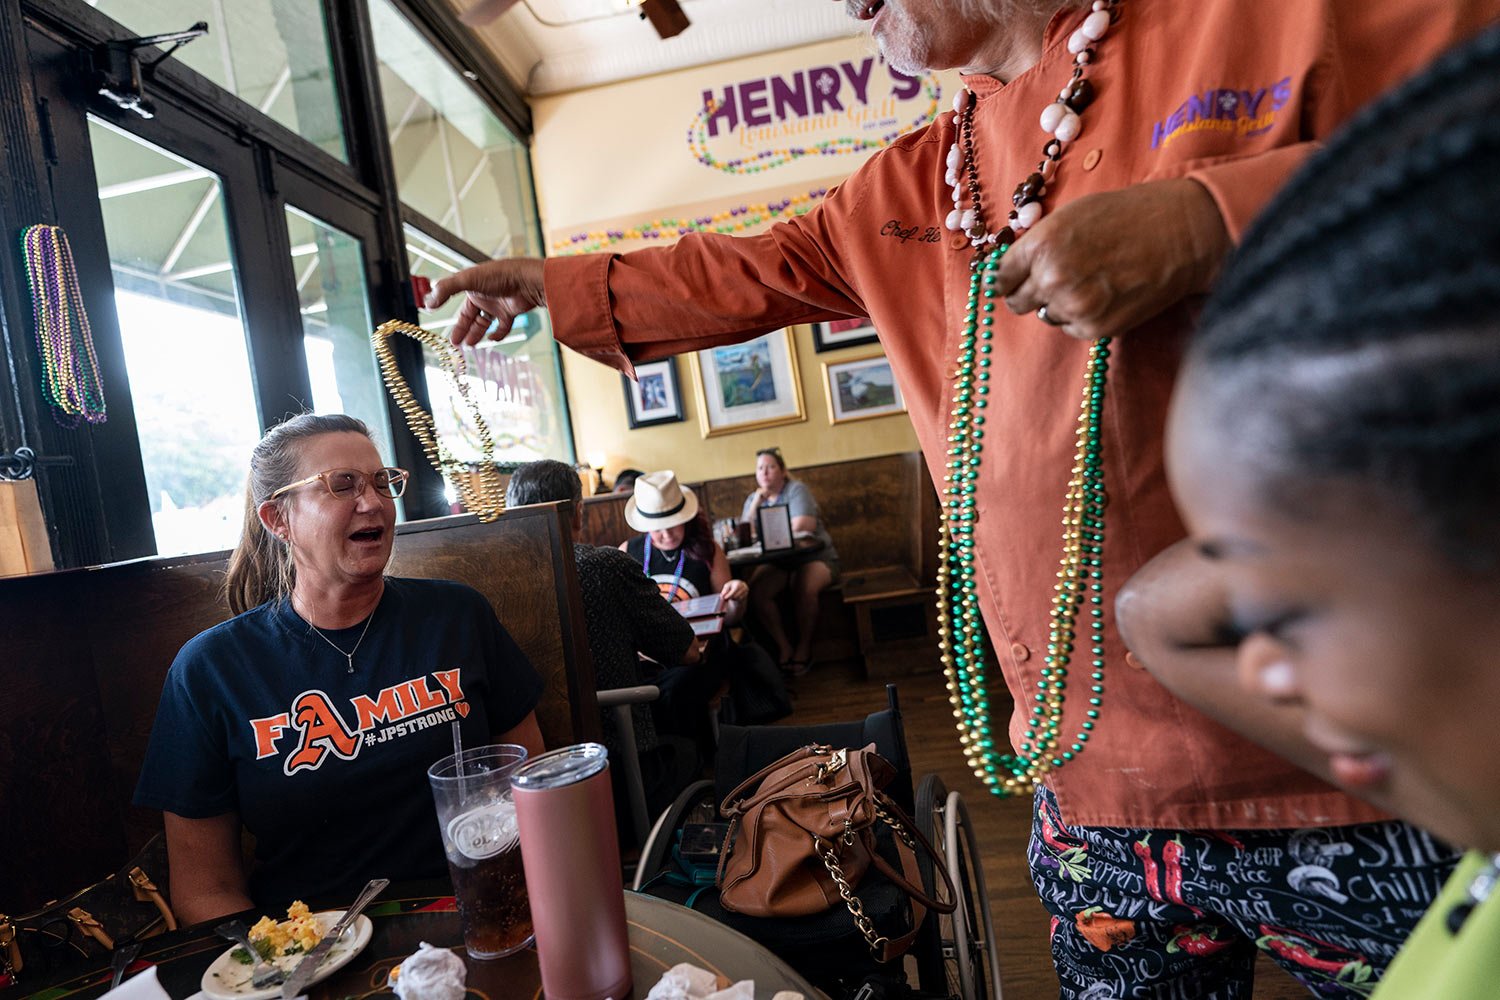  Henry Chandler tosses beads over the head of Janet Paulson, left, as she dines for lunch at his restaurant, Henry’s Louisiana Grill with with Tanesha McAuley, right, of the Cobb County Family Justice Center, in Acworth, Ga., Tuesday, Aug. 8, 2023. (